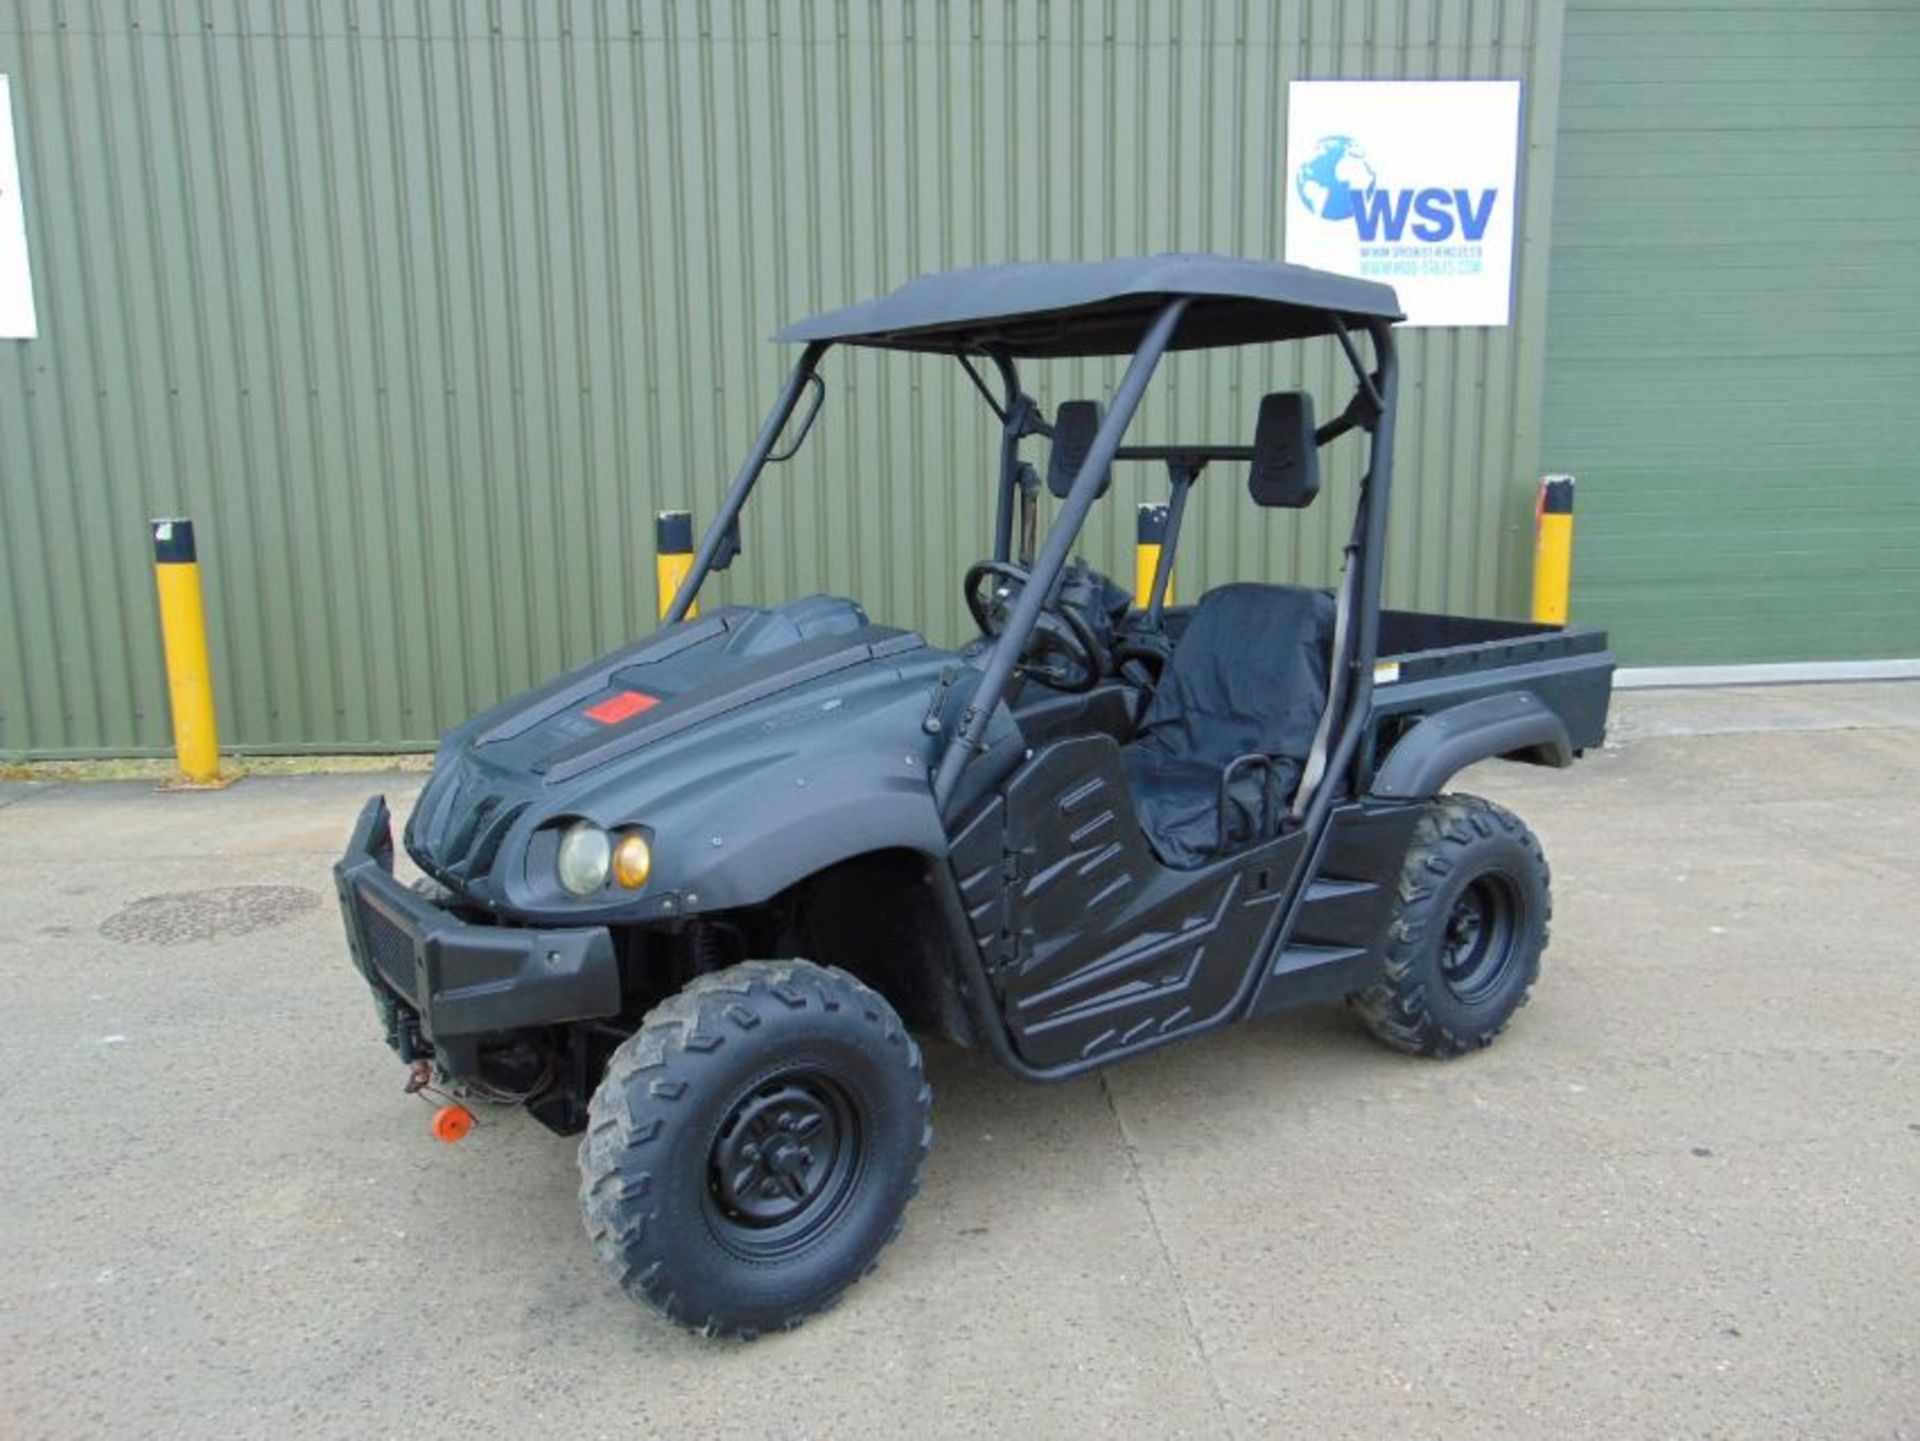 FARR 700 EFI Utility Vehicle ONLY 403 HOURS!